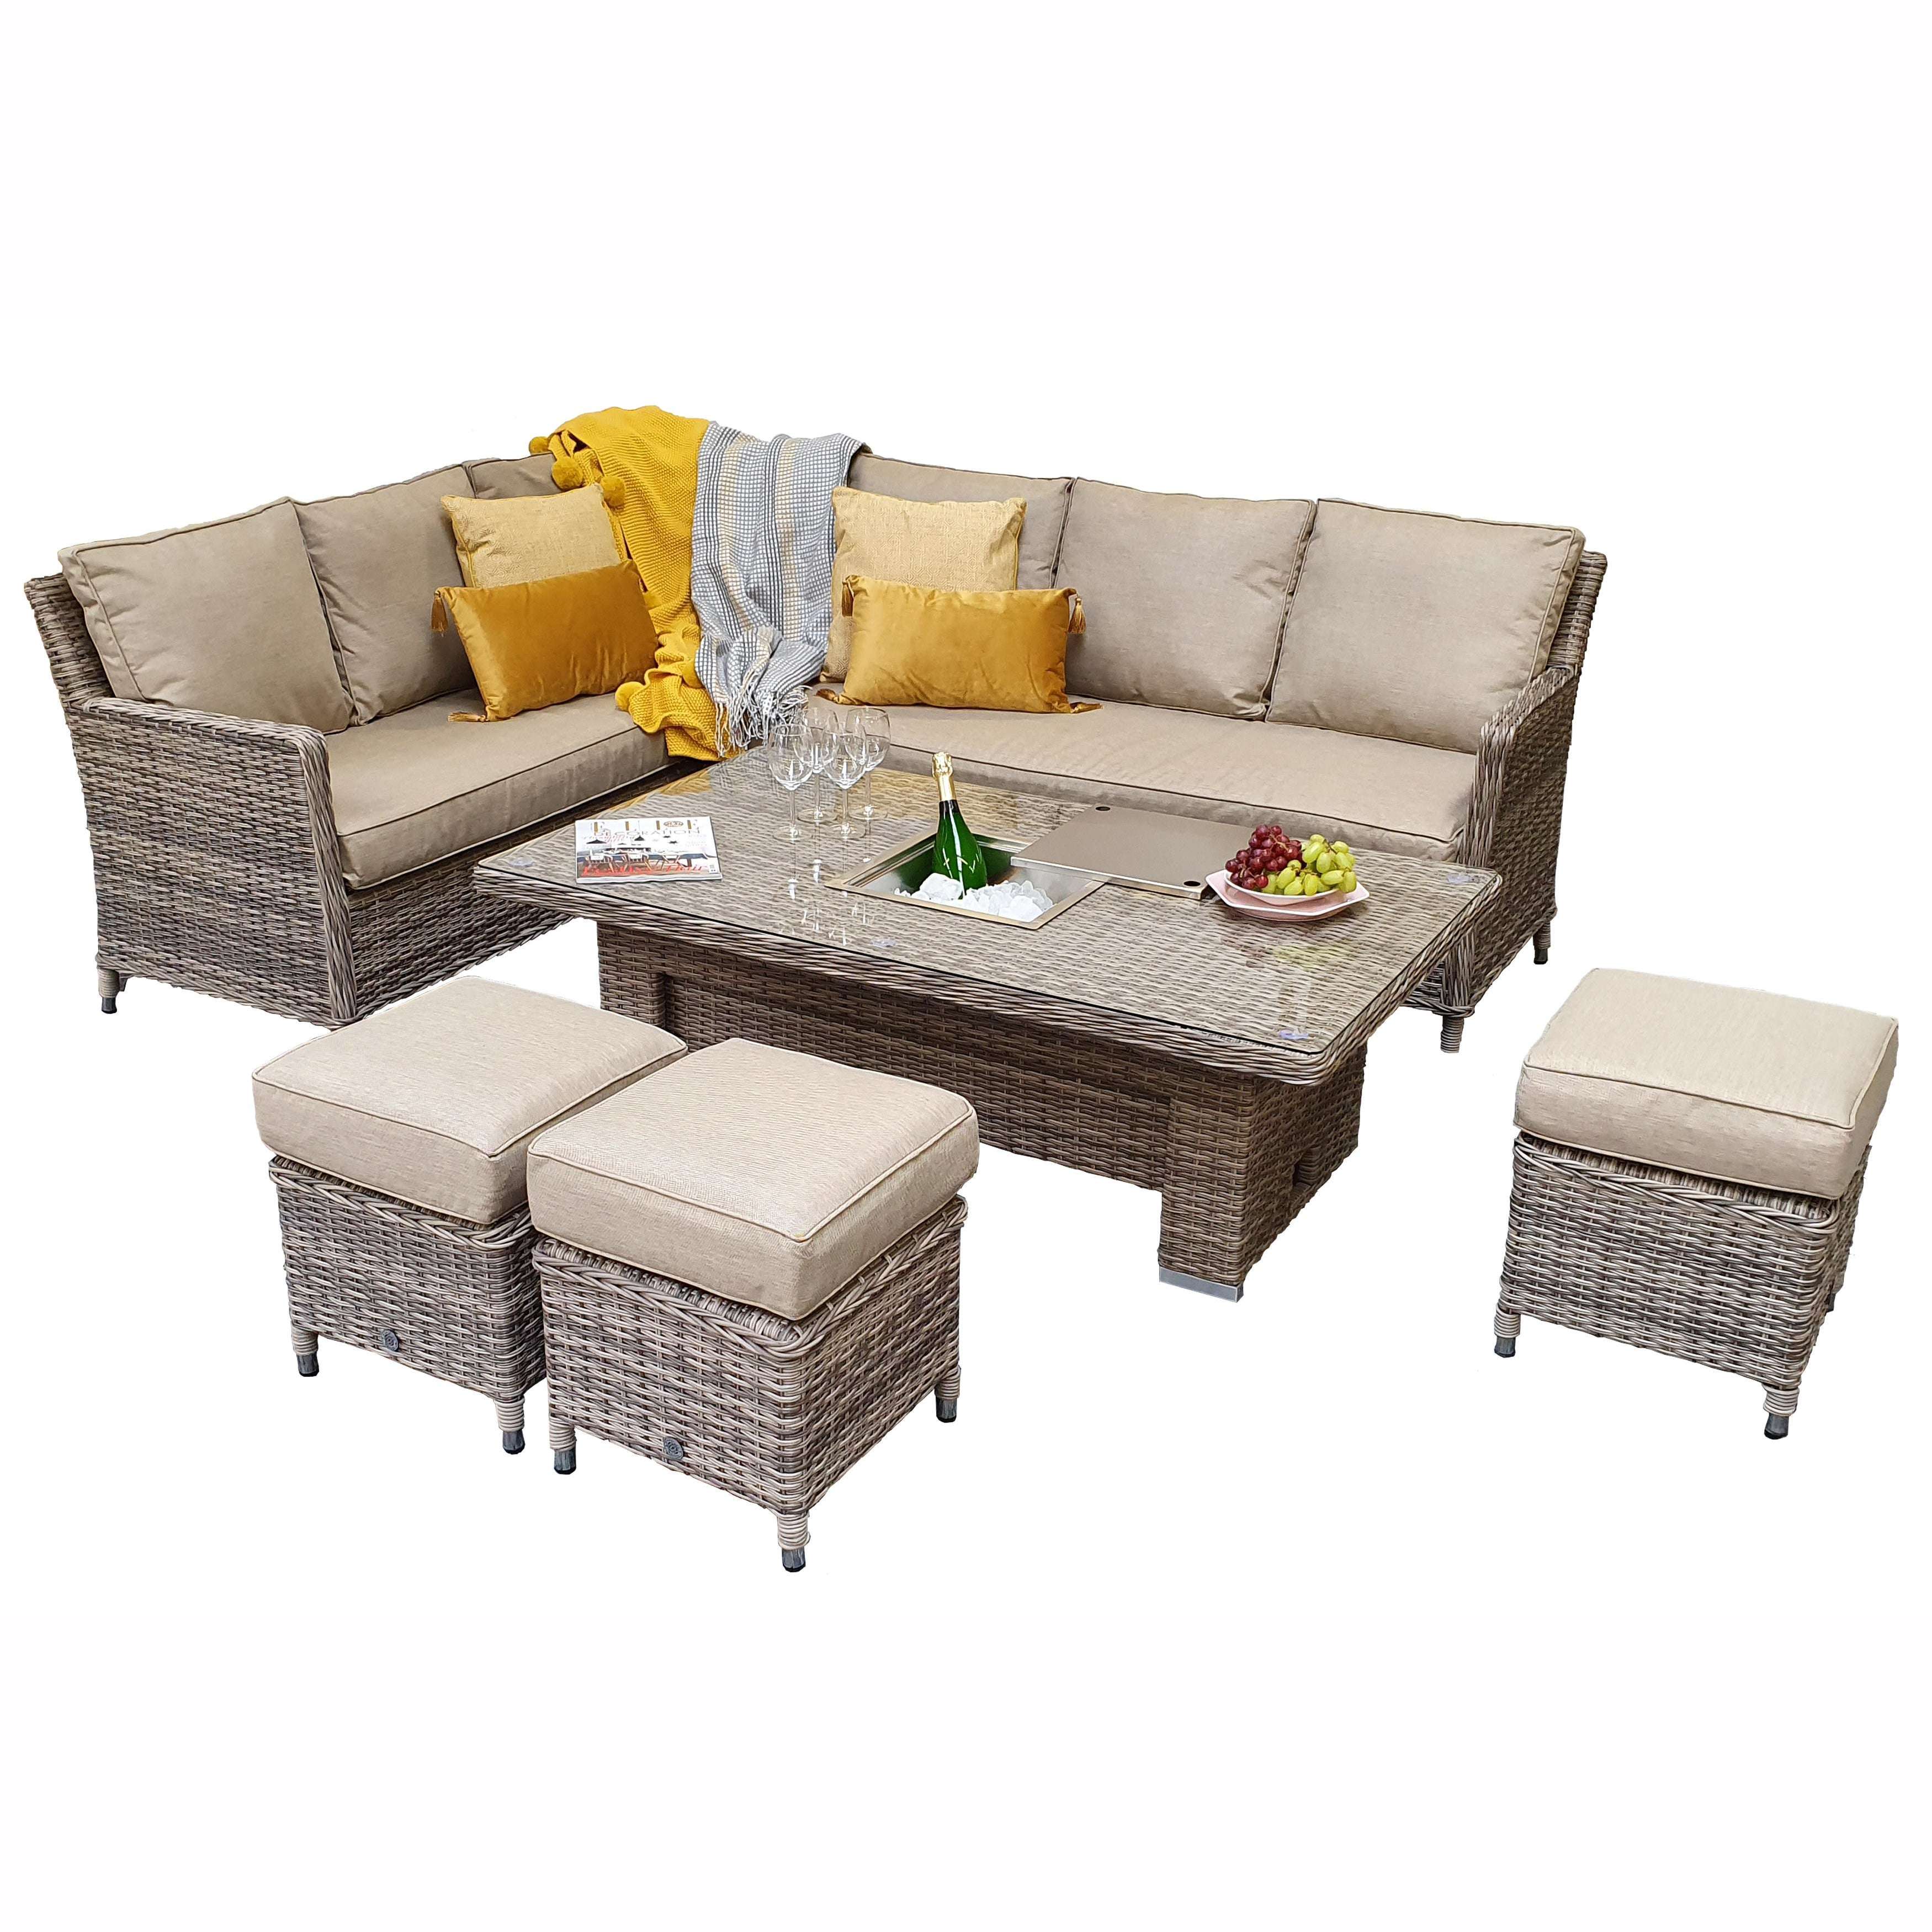 Exceptional Garden:Signature Weave Edwina Corner Dining Set with Lift Table and Ice Bucket - Mixed Nature Weave